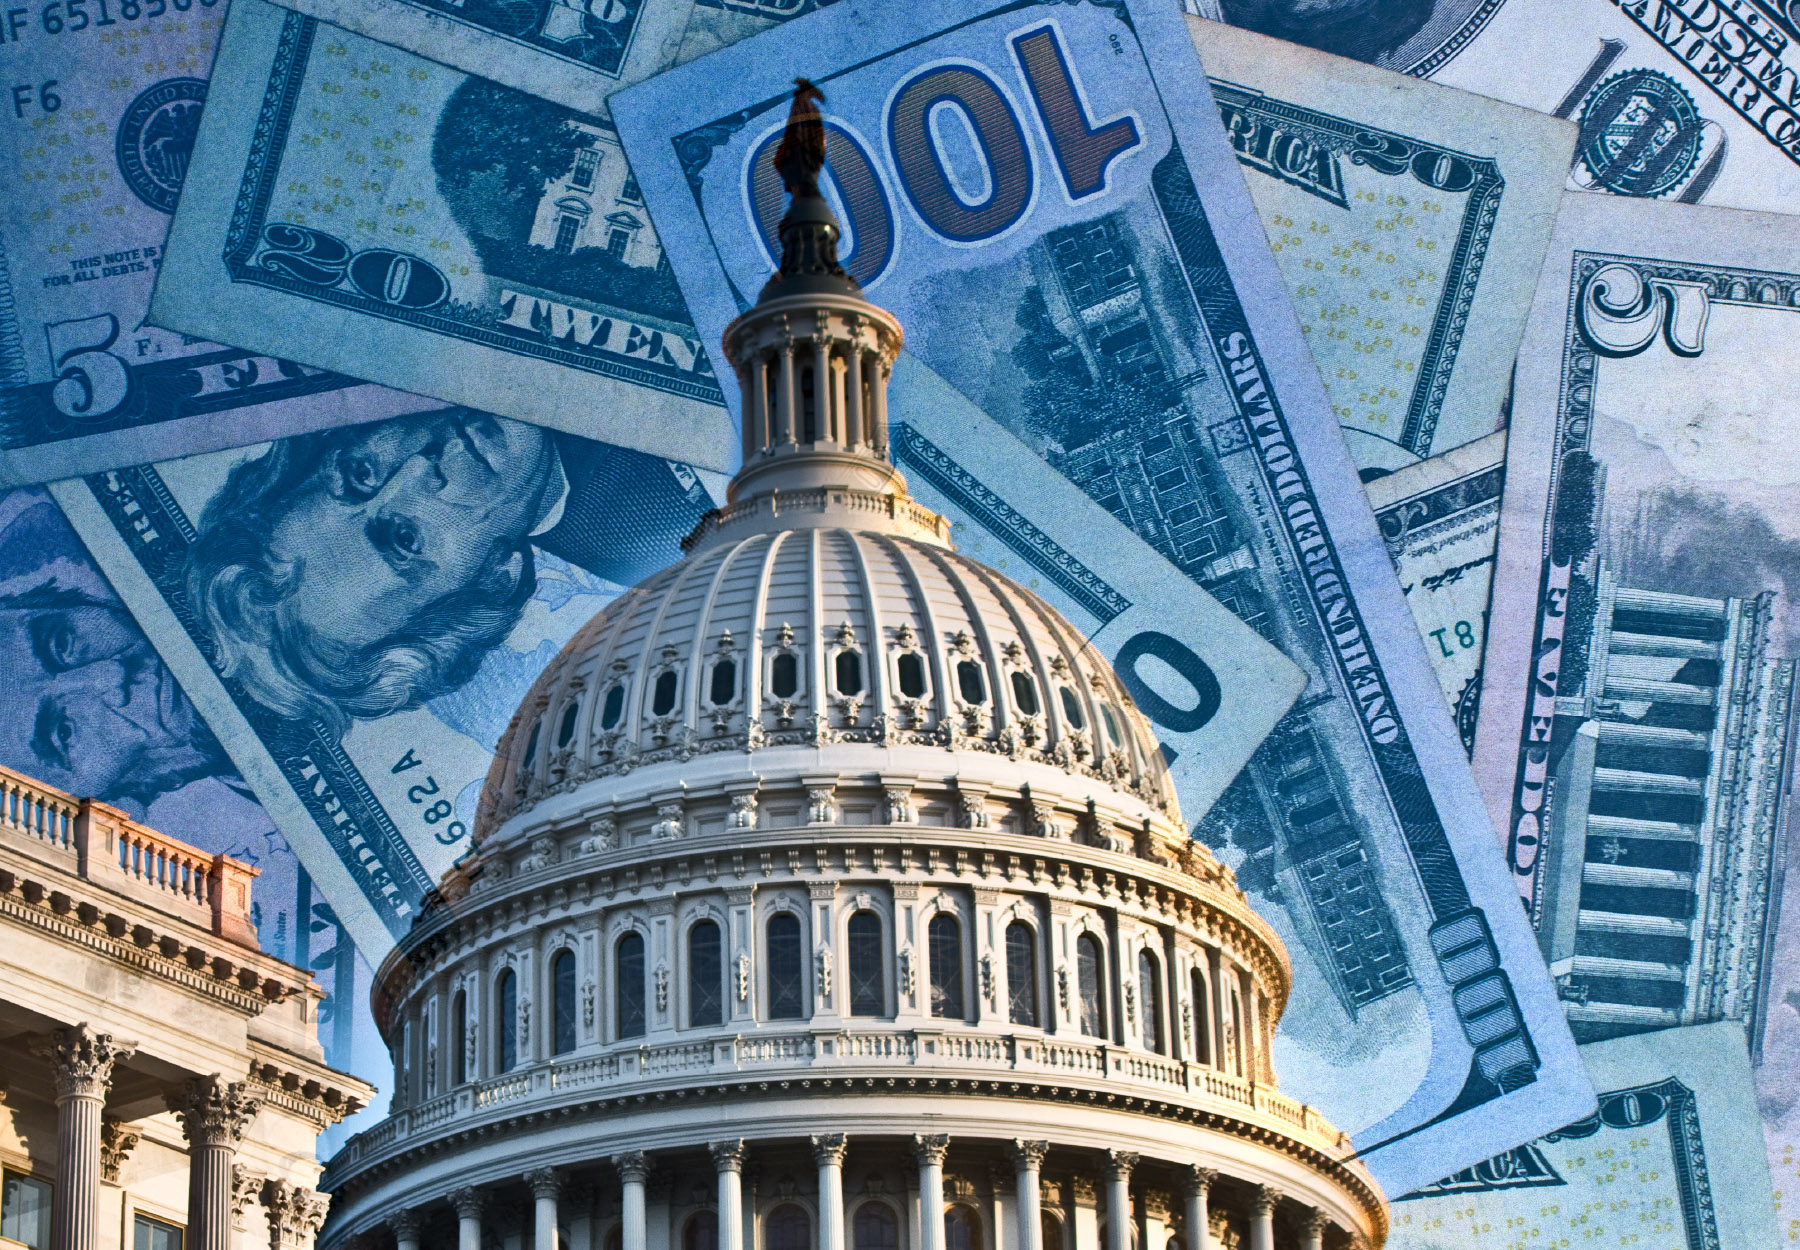 An illustration of the US Capitol building with dollar bills in the background